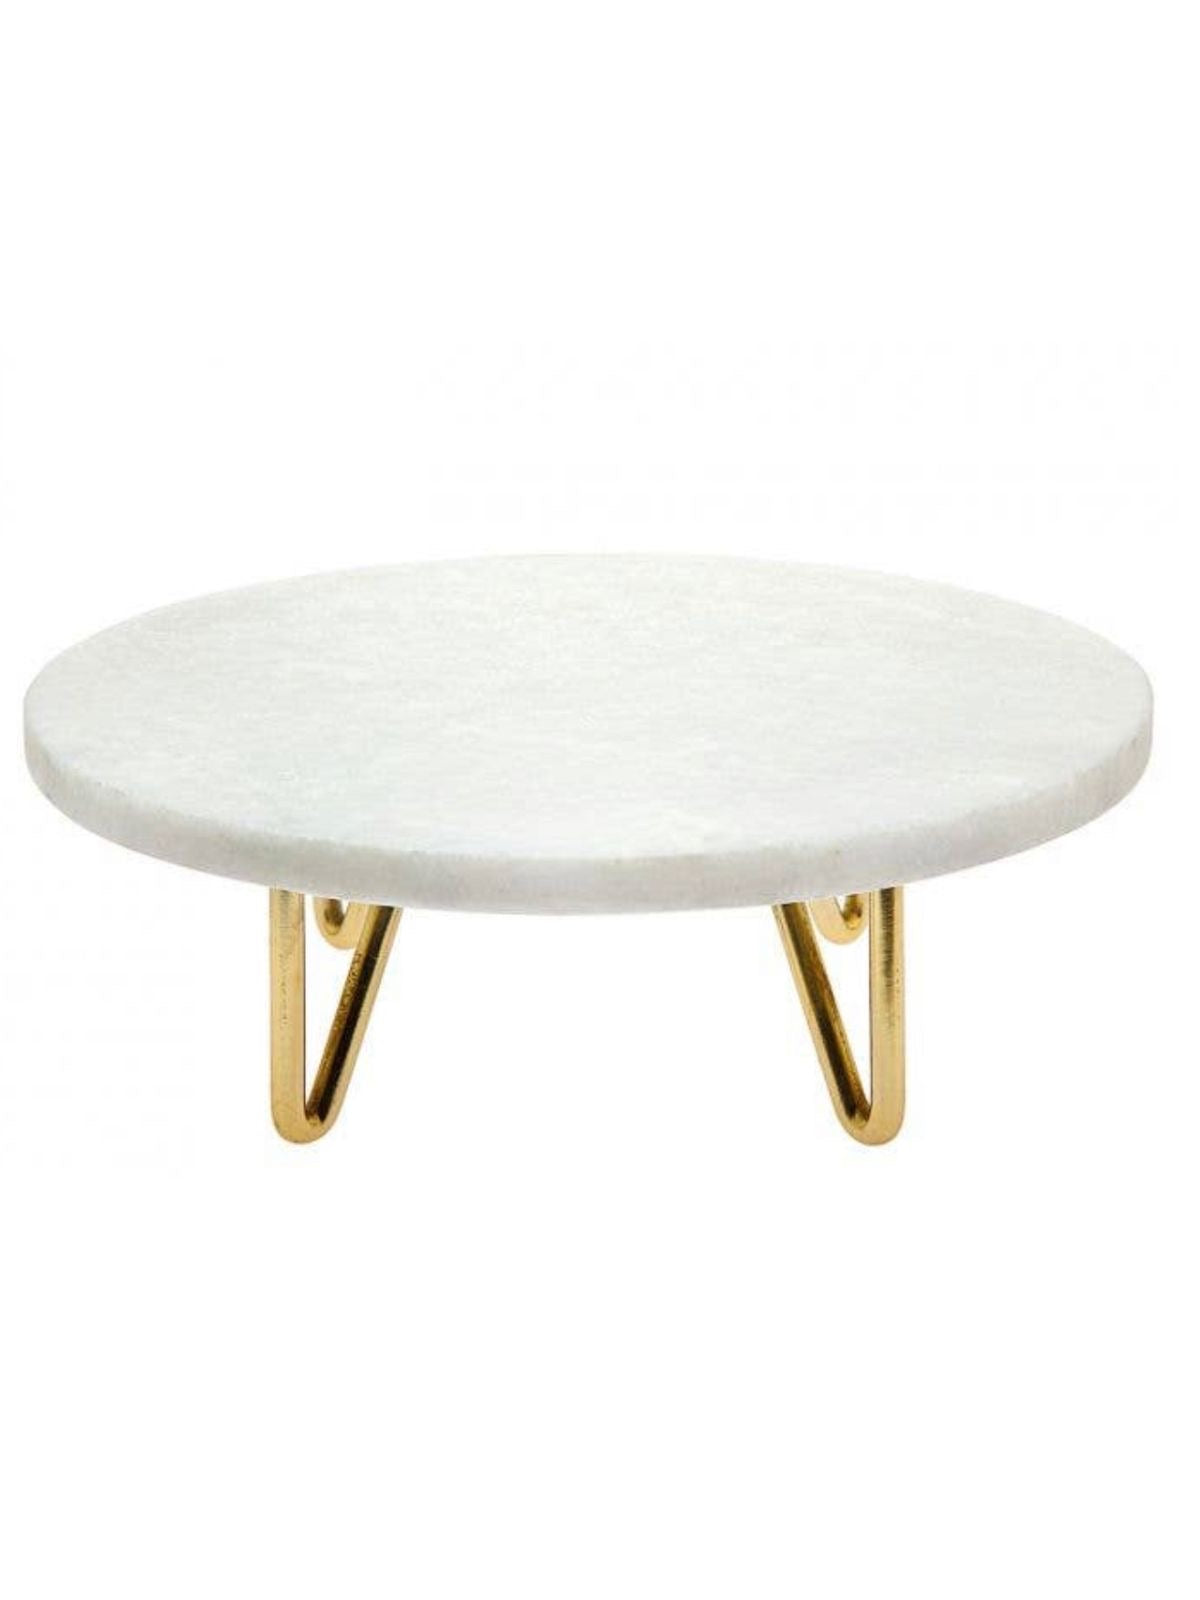 L 10.5D Modern Cake Stand Crafted of White Marble With Gold-Plated Legs.